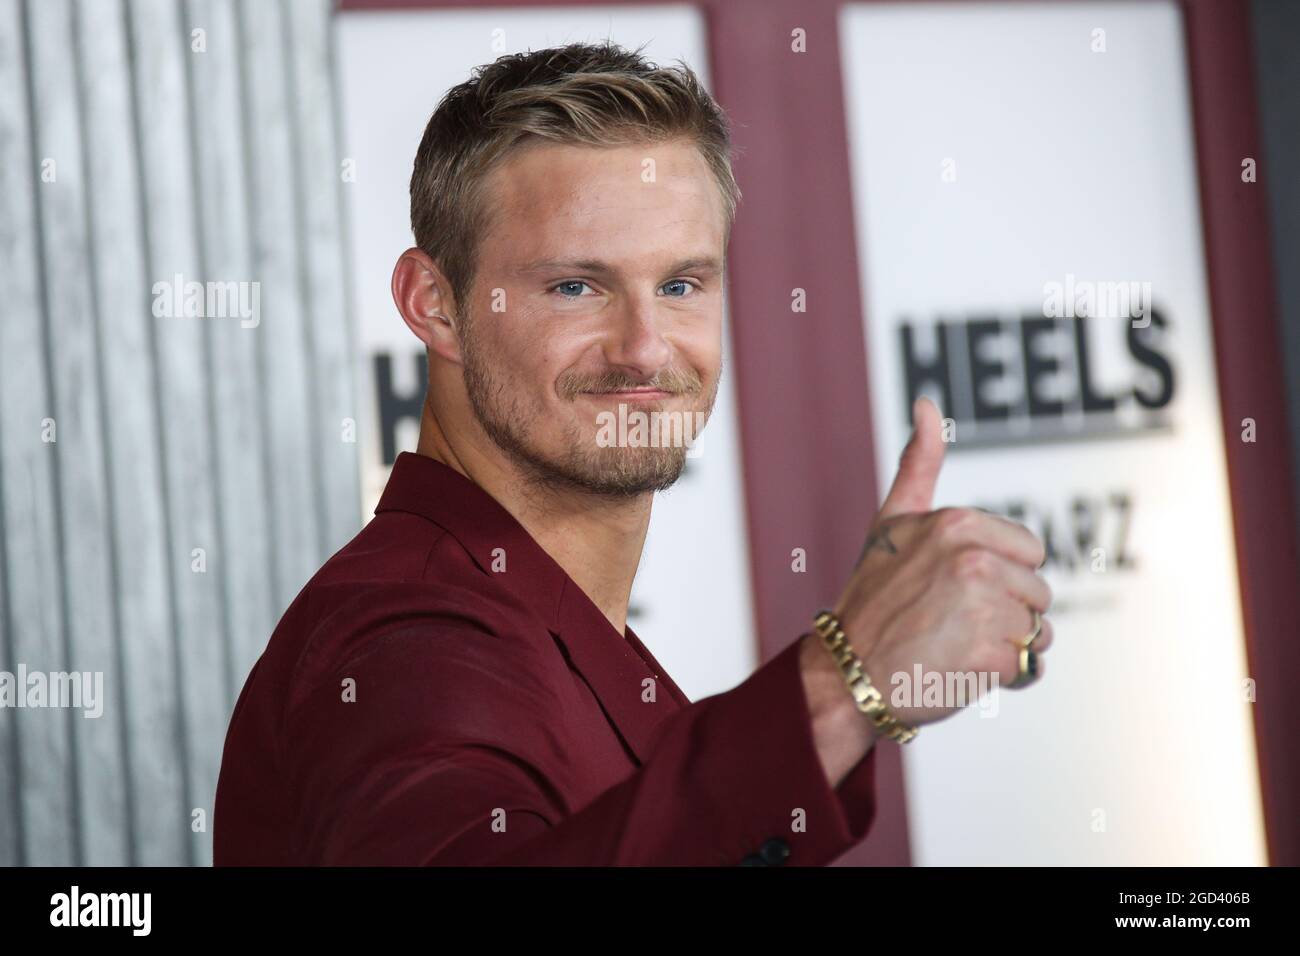 Los Angeles, United States. 10th Aug, 2021. LOS ANGELES, CALIFORNIA, USA AUGUST 10: Alexander Ludwig wearing a Paul Smith suit, Christian Louboutin a water and David Yurman jewelry